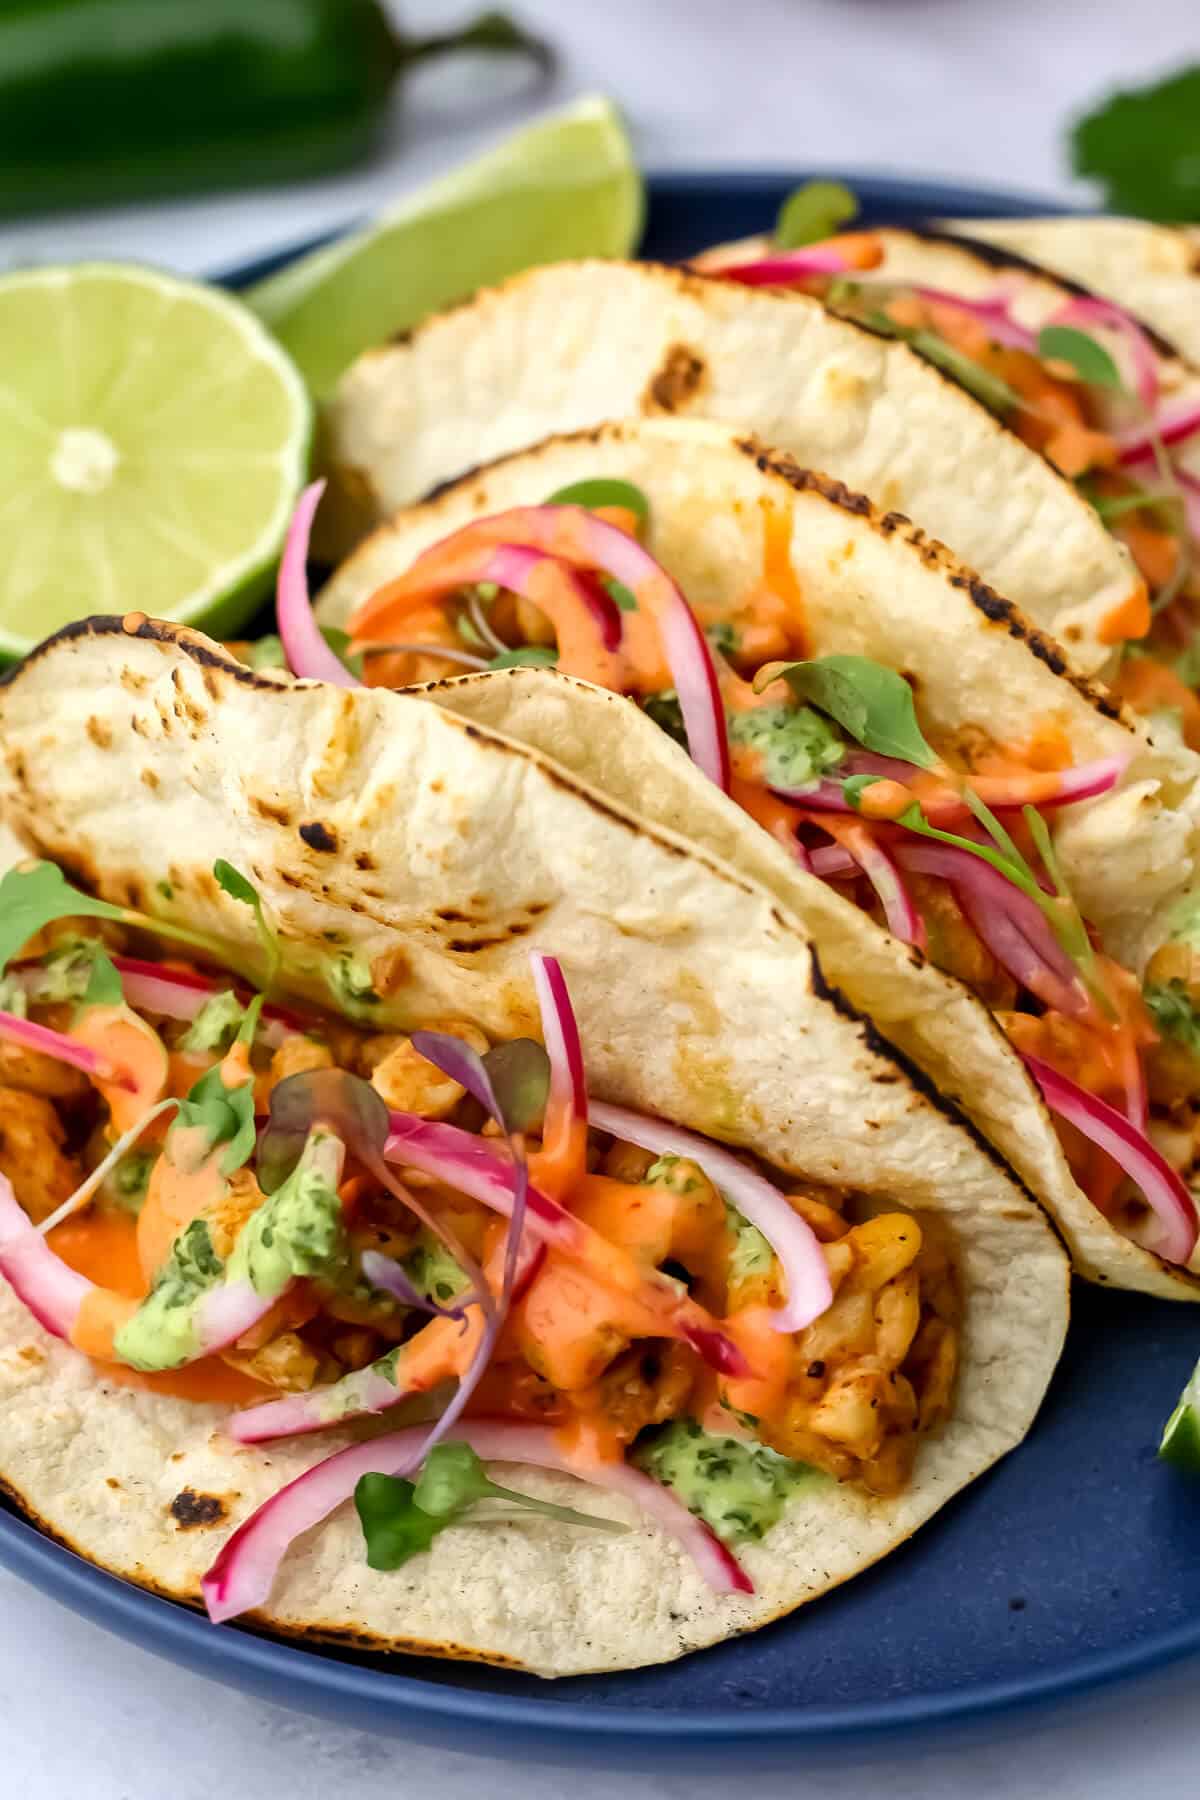 A close of of tempeh tacos with Mexican pickled onions and chipotle mayo drizzled on them.